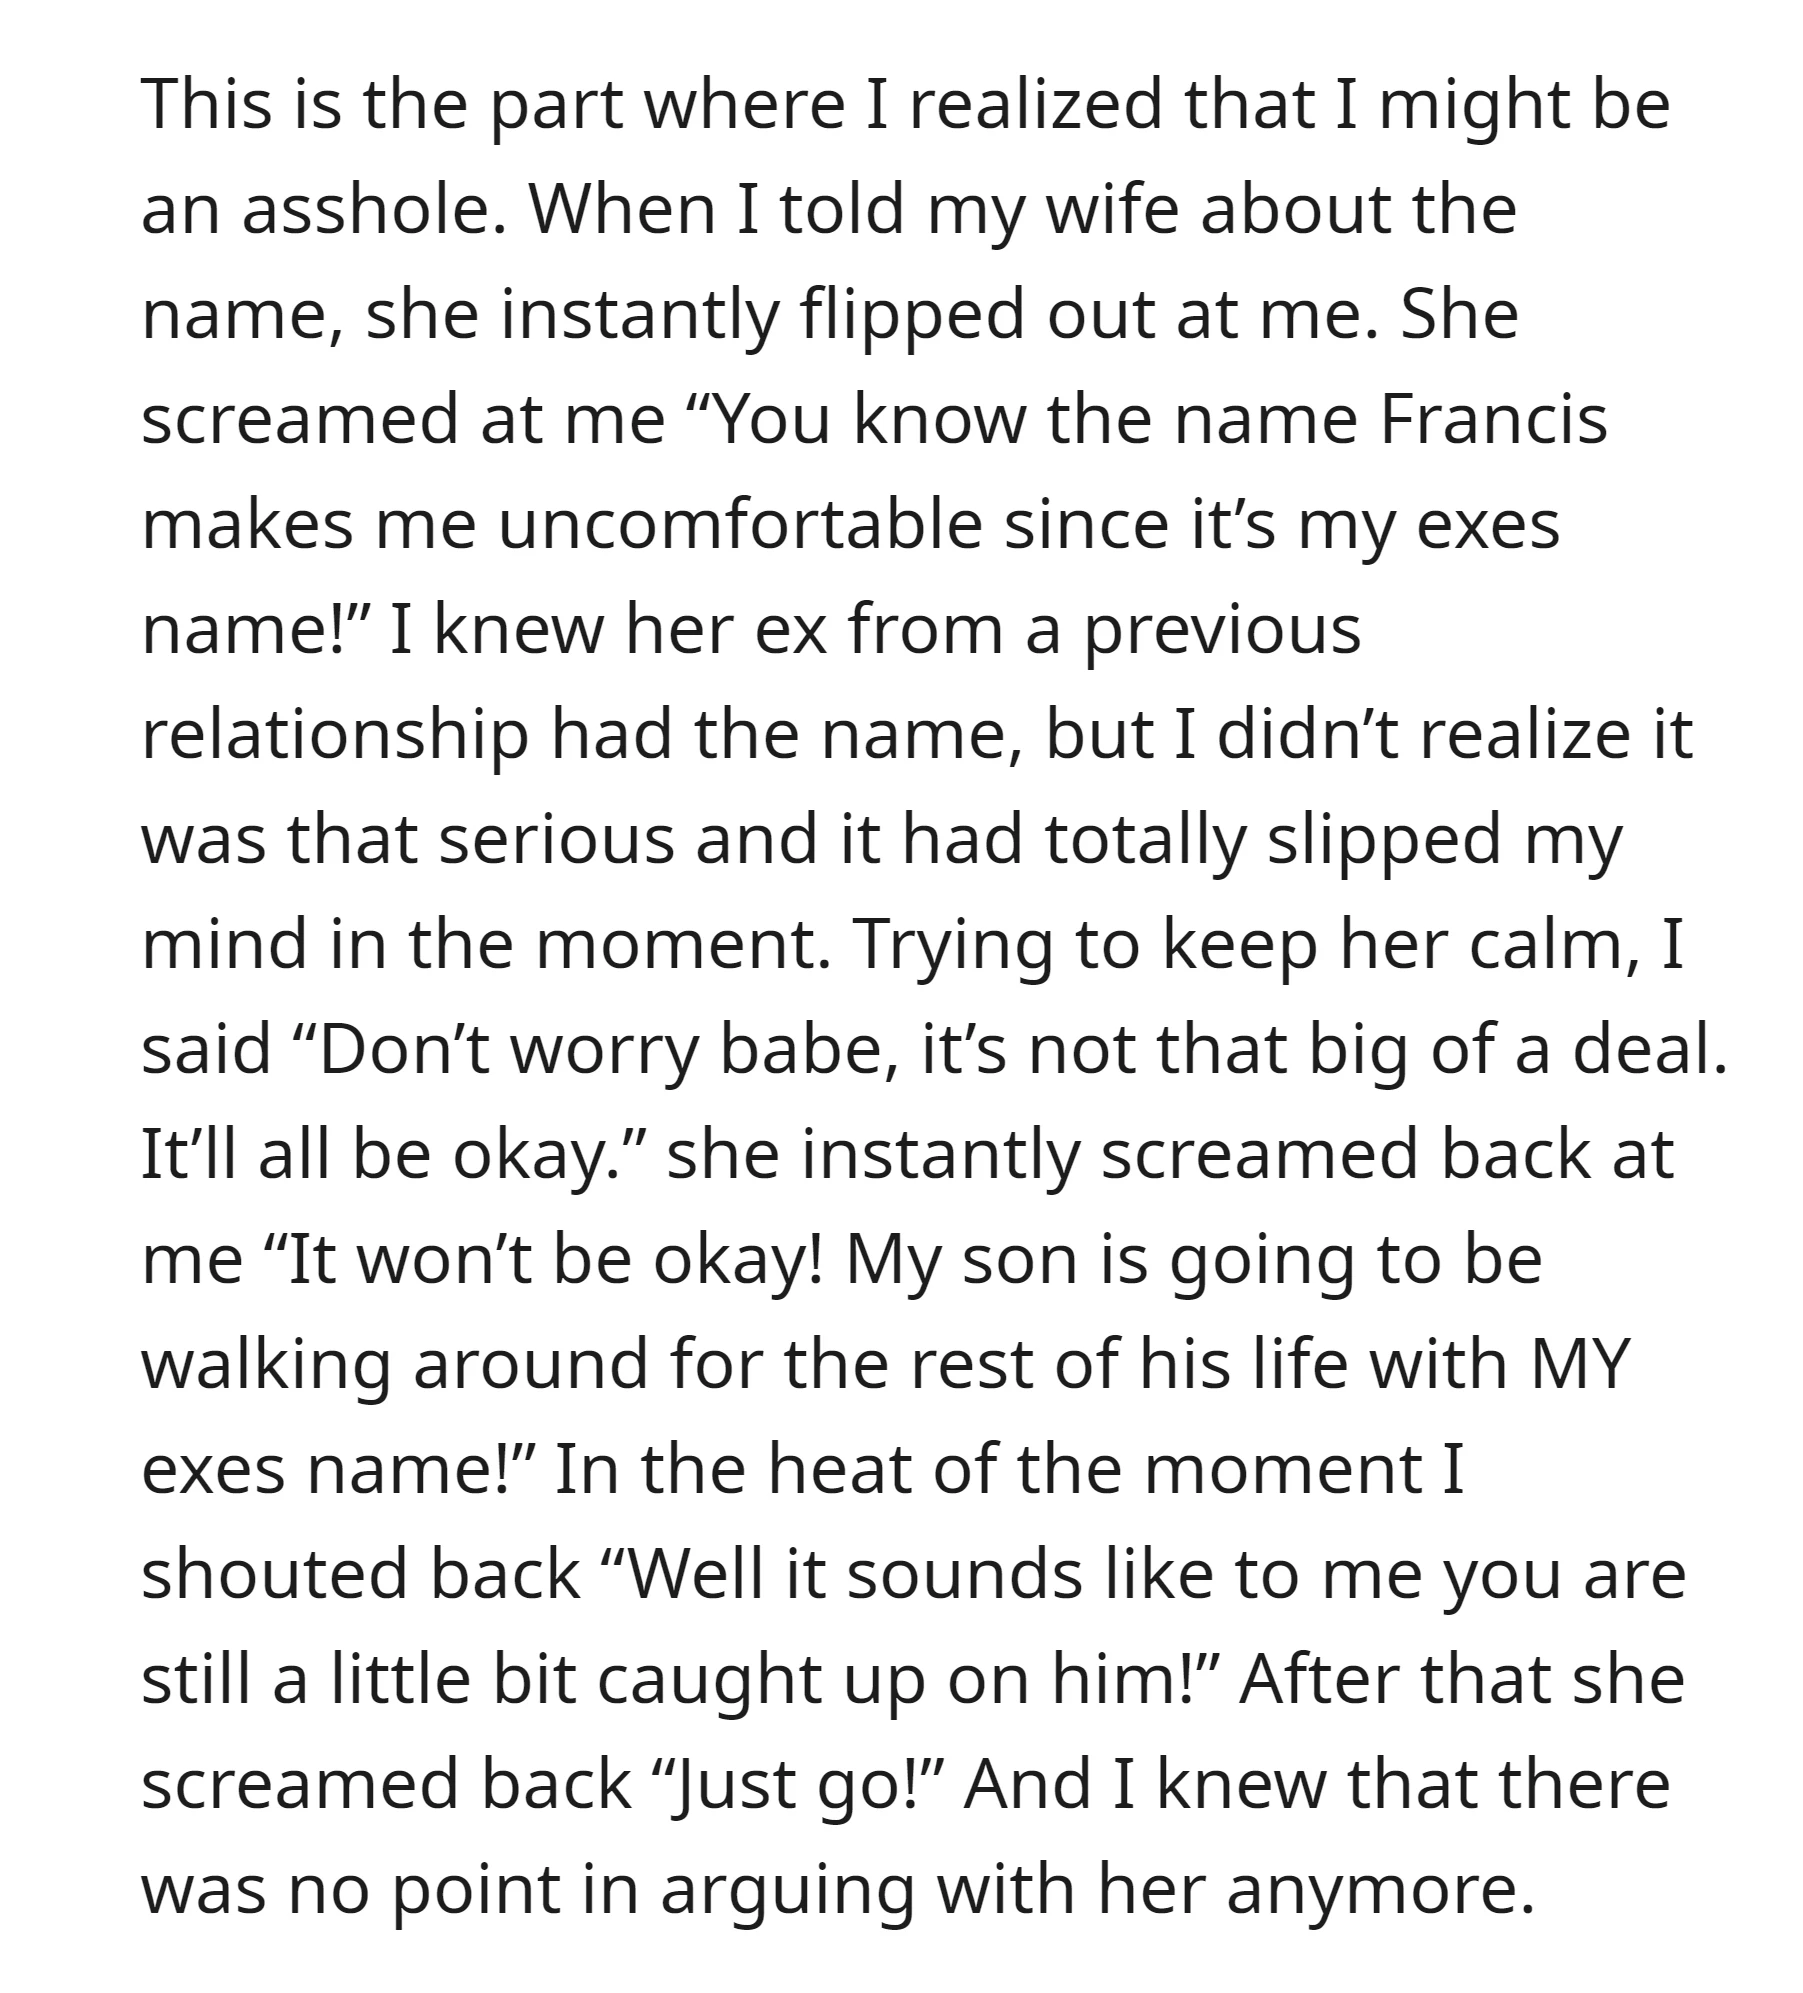 OP's wife objected because it was her ex's name